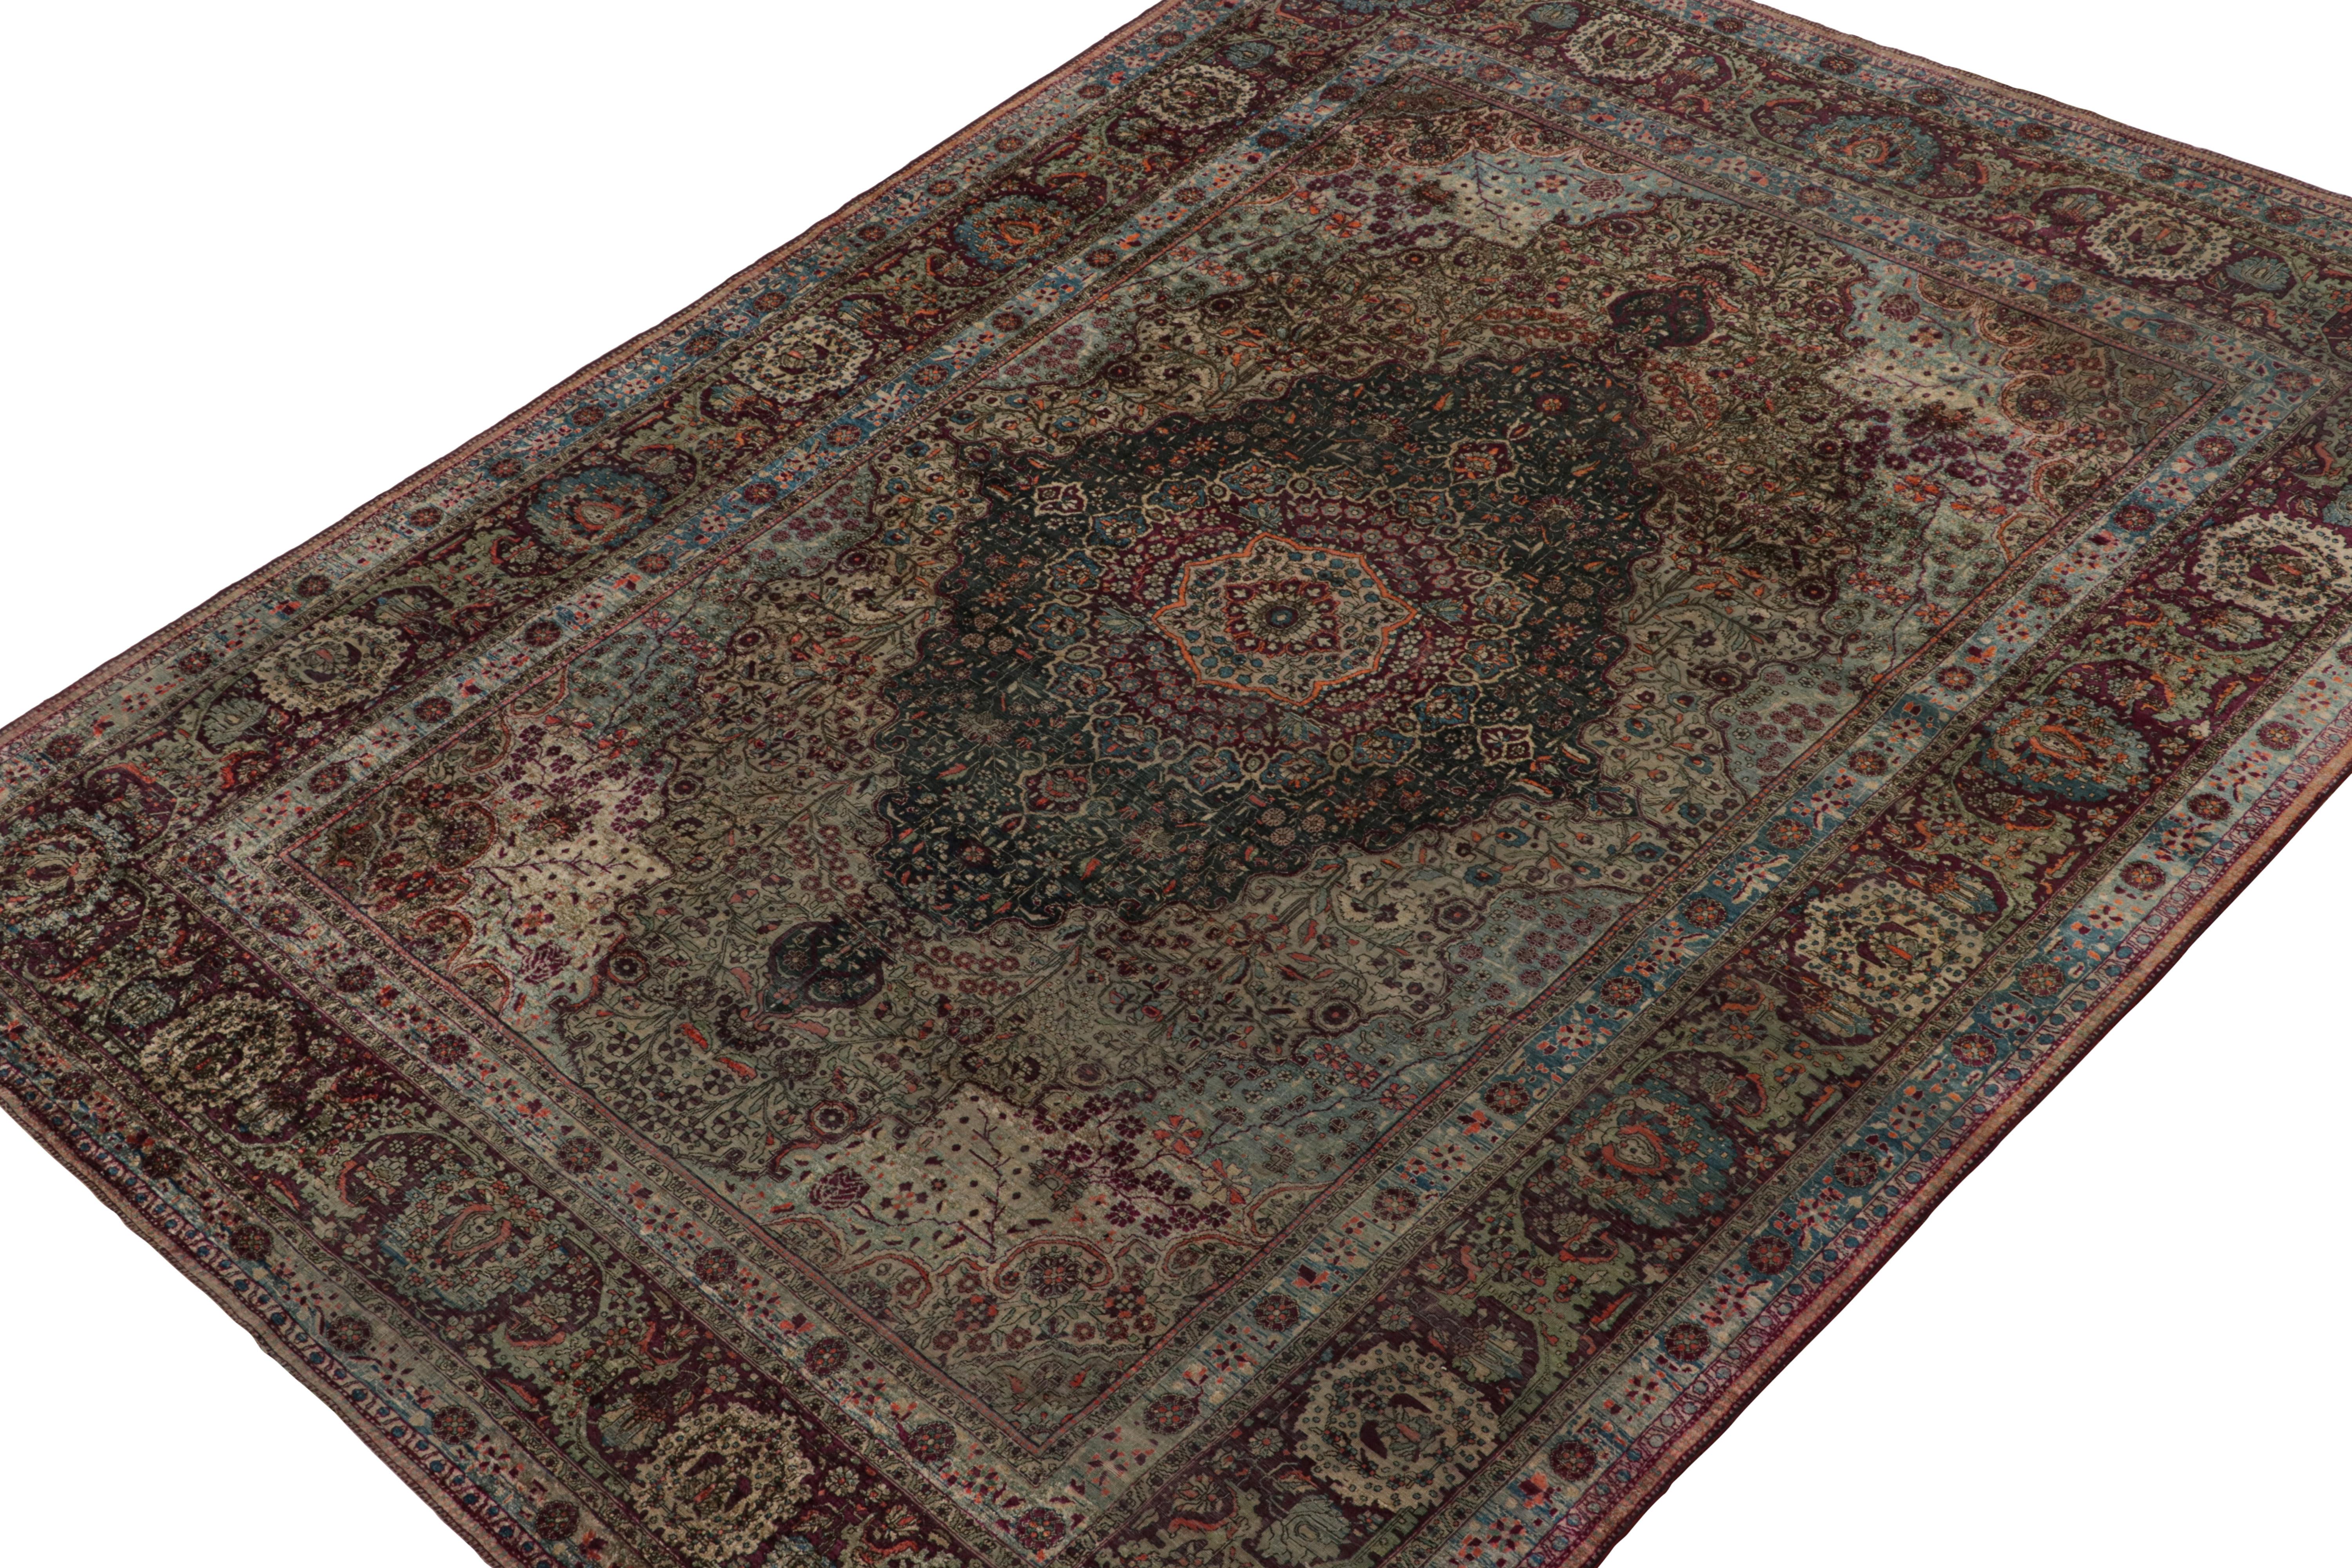 This 8x11 rug is believed to be a rare antique Persian rug of Mohtashem Kashan provenance—hand-knotted in fine silk circa 1880-1890. 

On the Design: 

This piece enjoys a dense all over floral pattern in concentric medallions and intricate